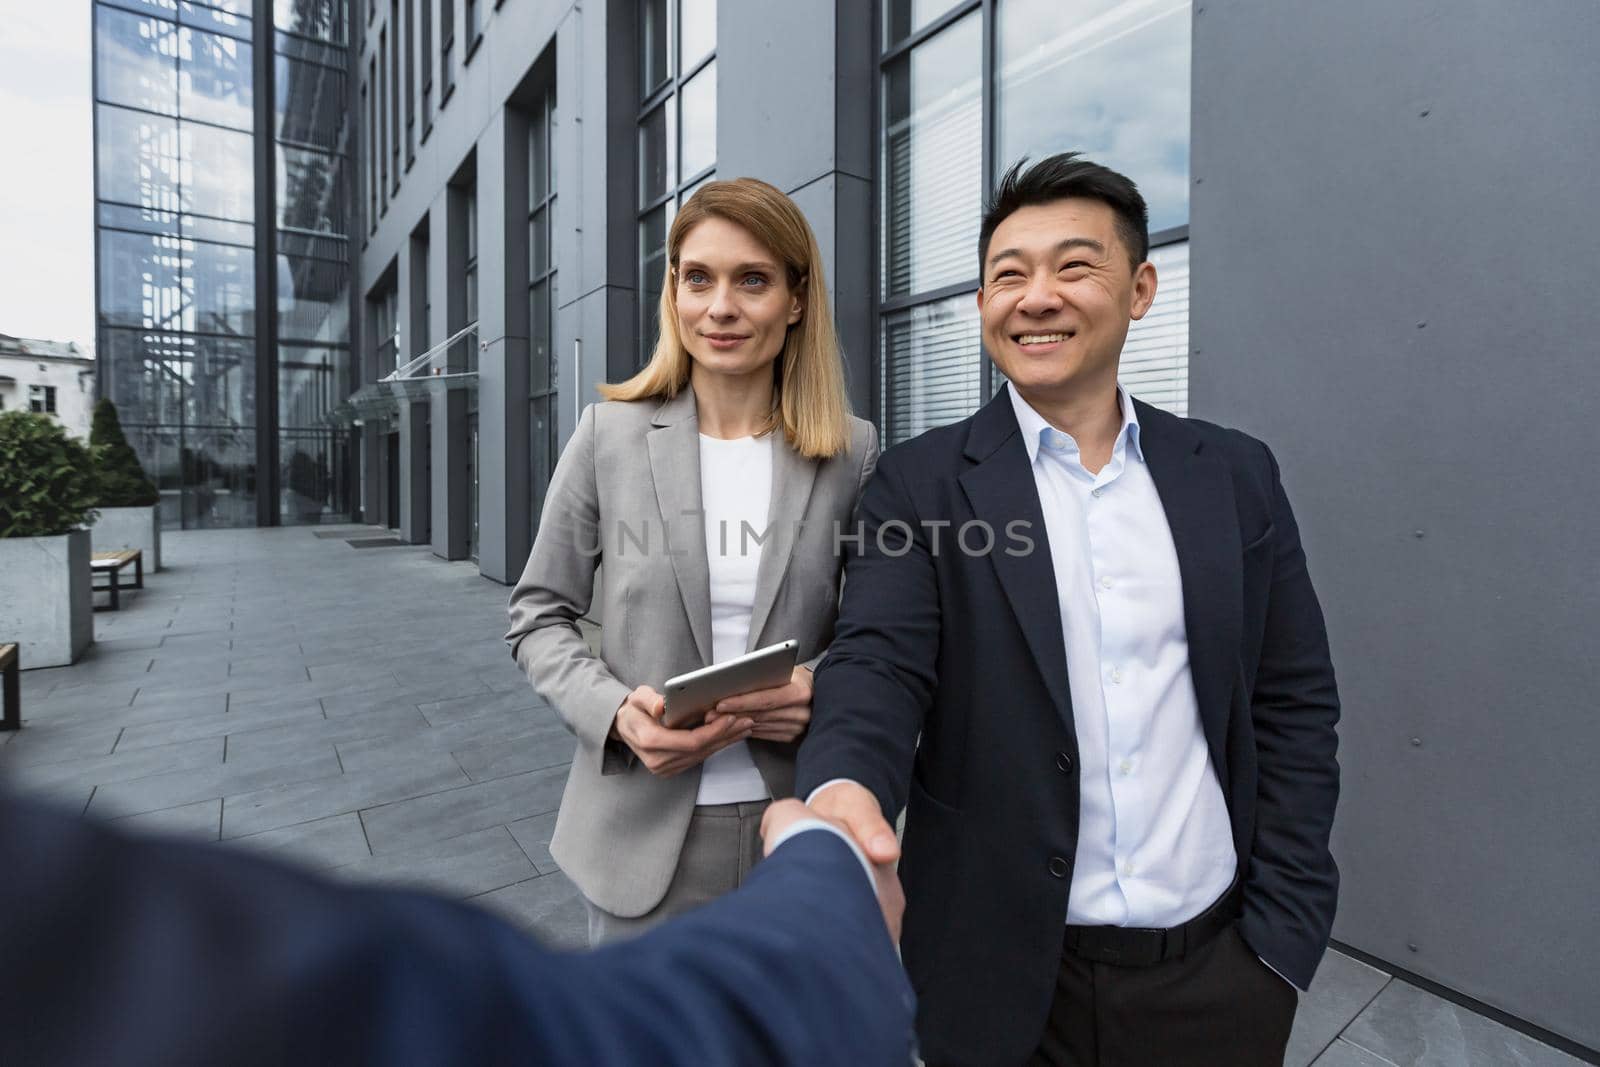 Business meet, three business colleagues greet each other, men shake hand by voronaman